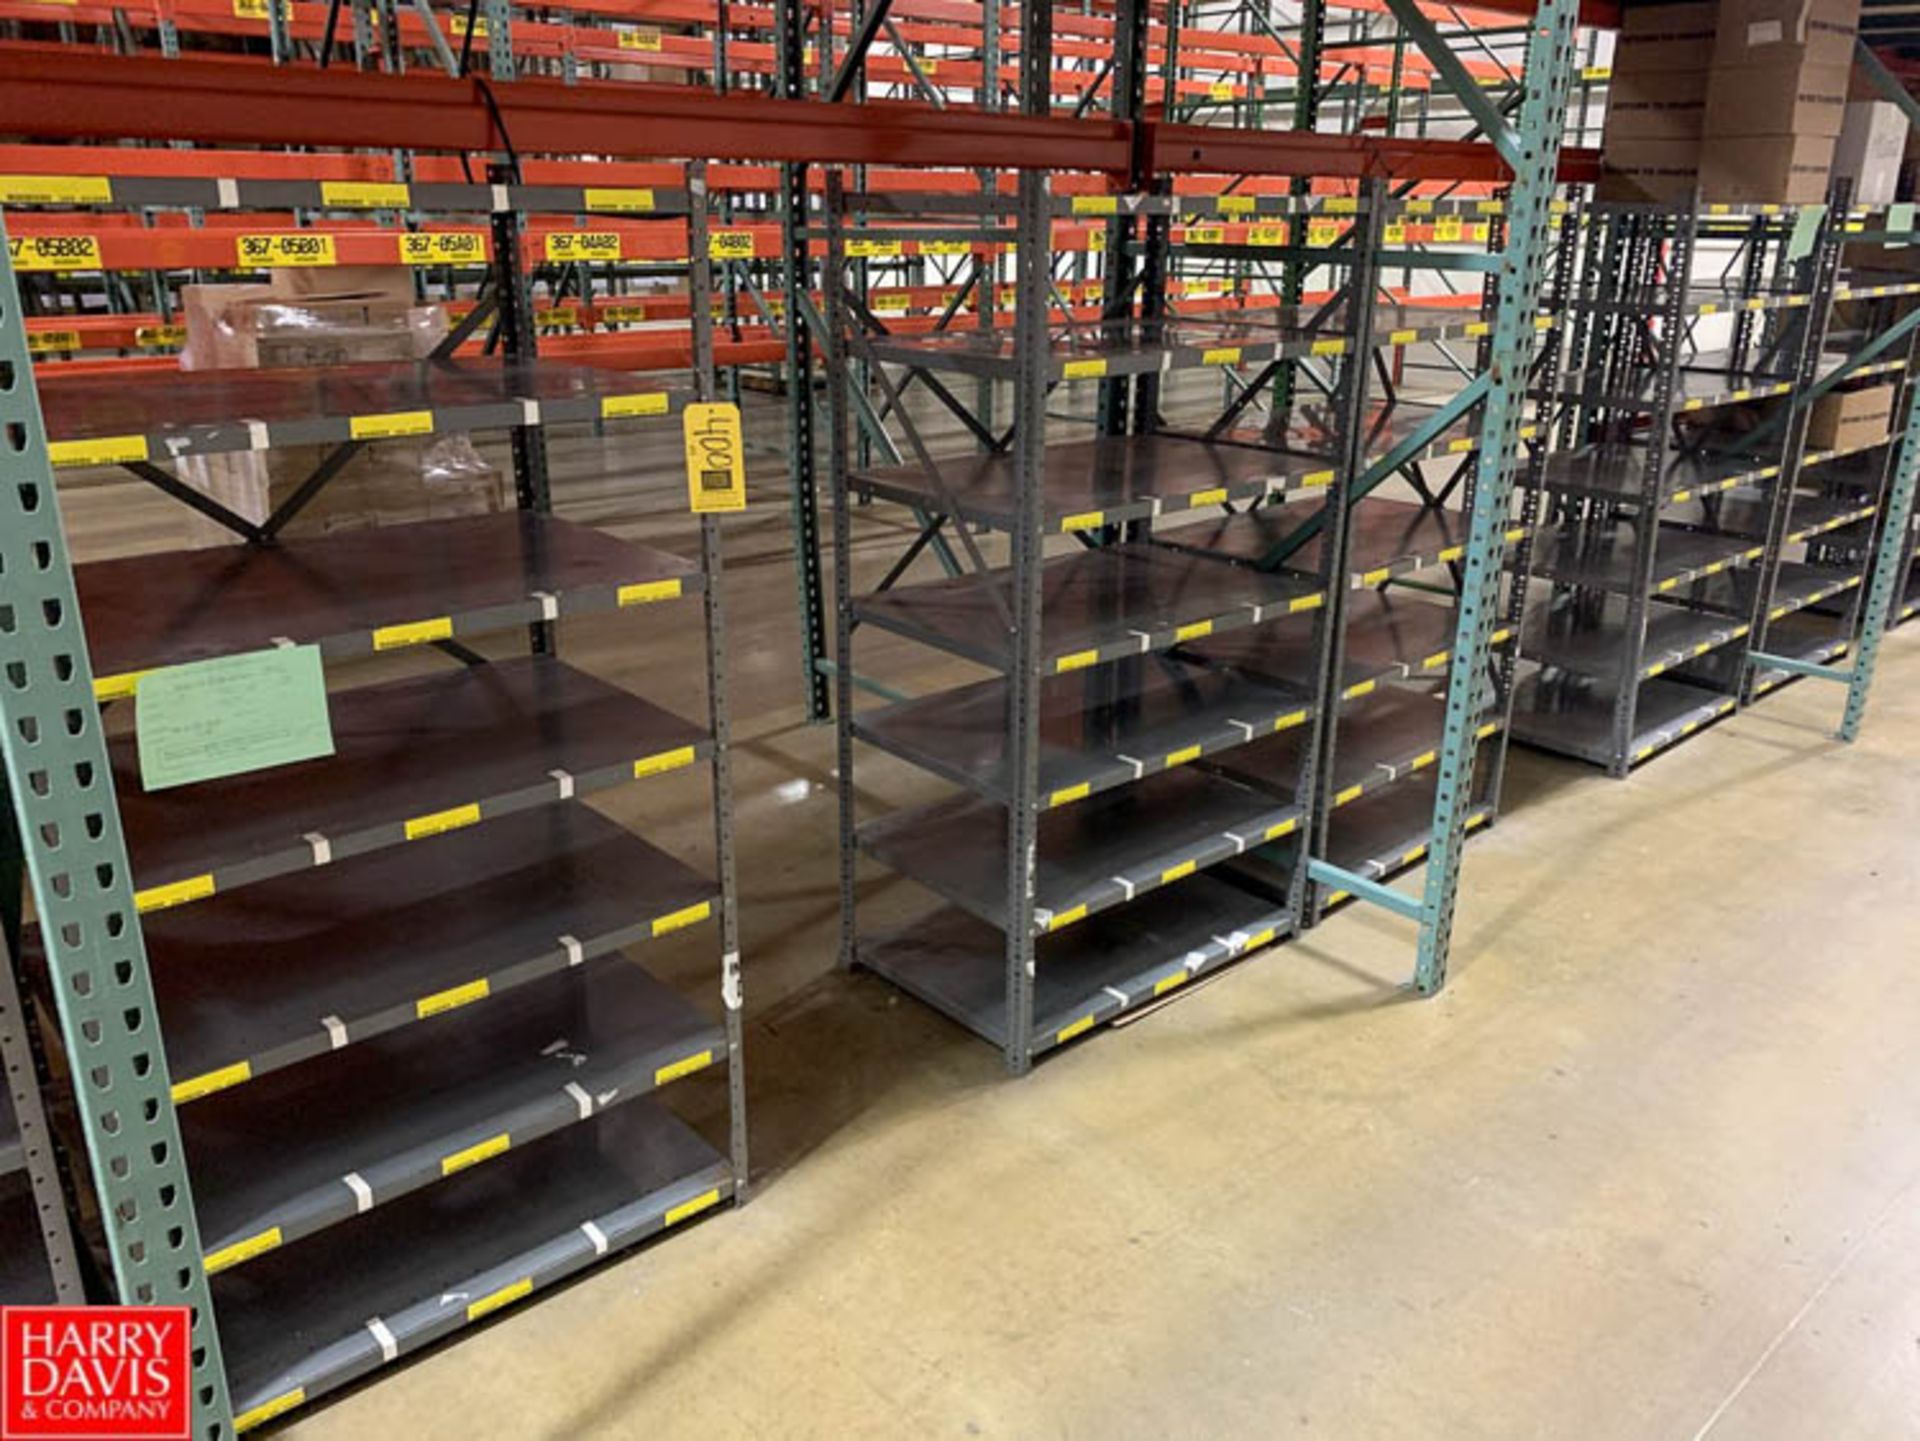 Shelving Units 74"""" x 36"""" Rigging Fee: $80 ** , Removal will begin on March